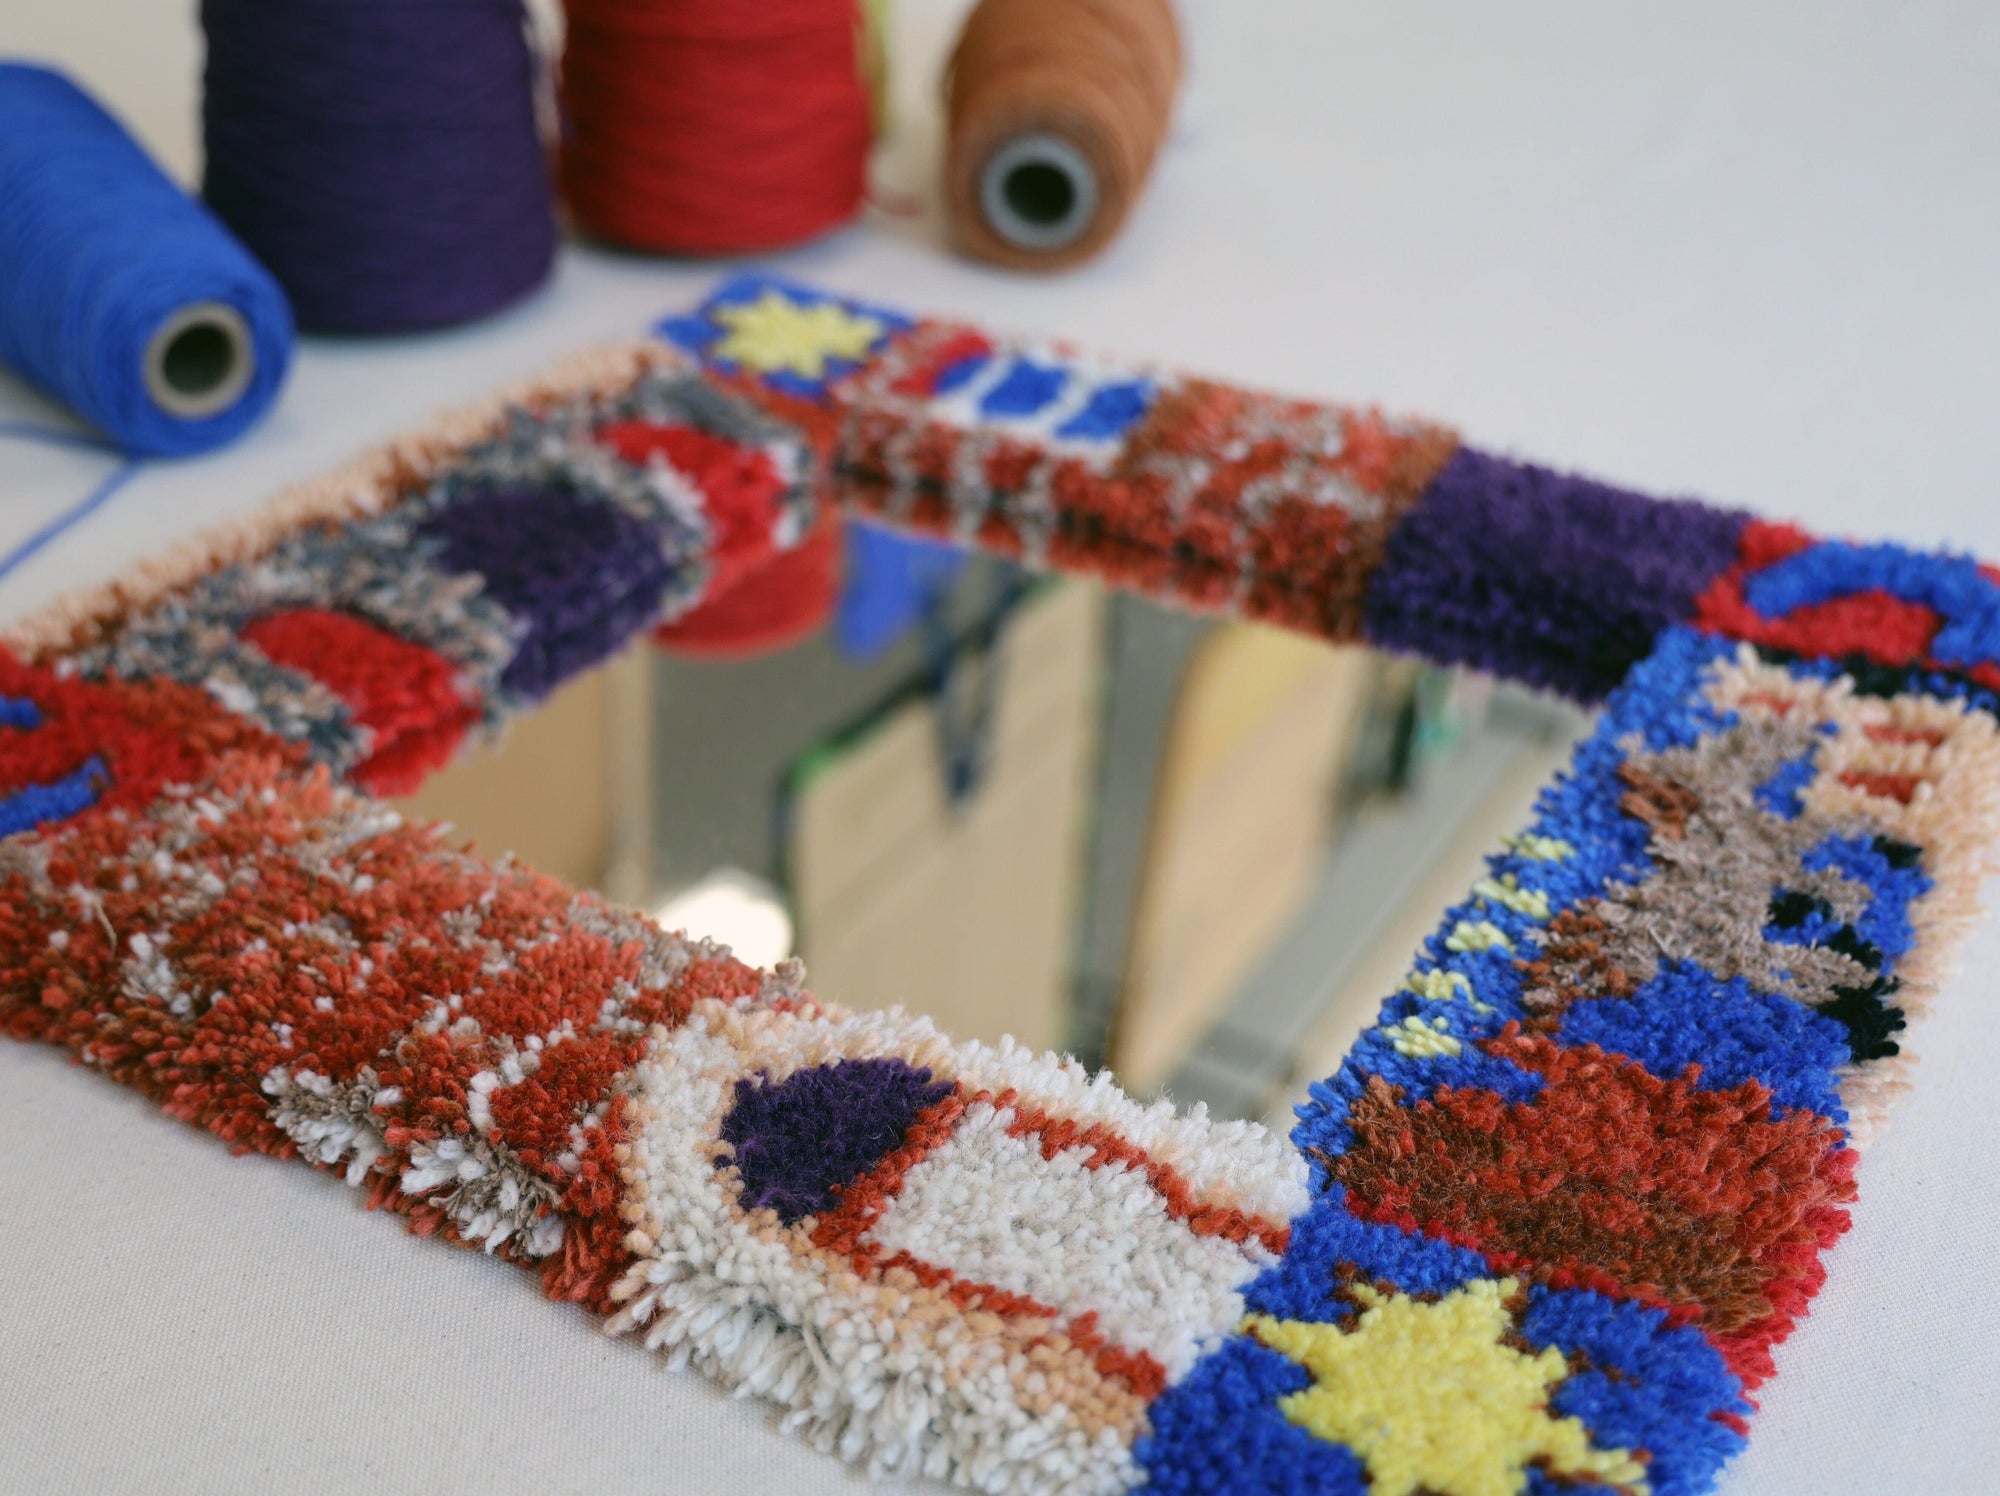 One-Day Tufting Workshops Tuft the World Tuft a mirror Jan 6 